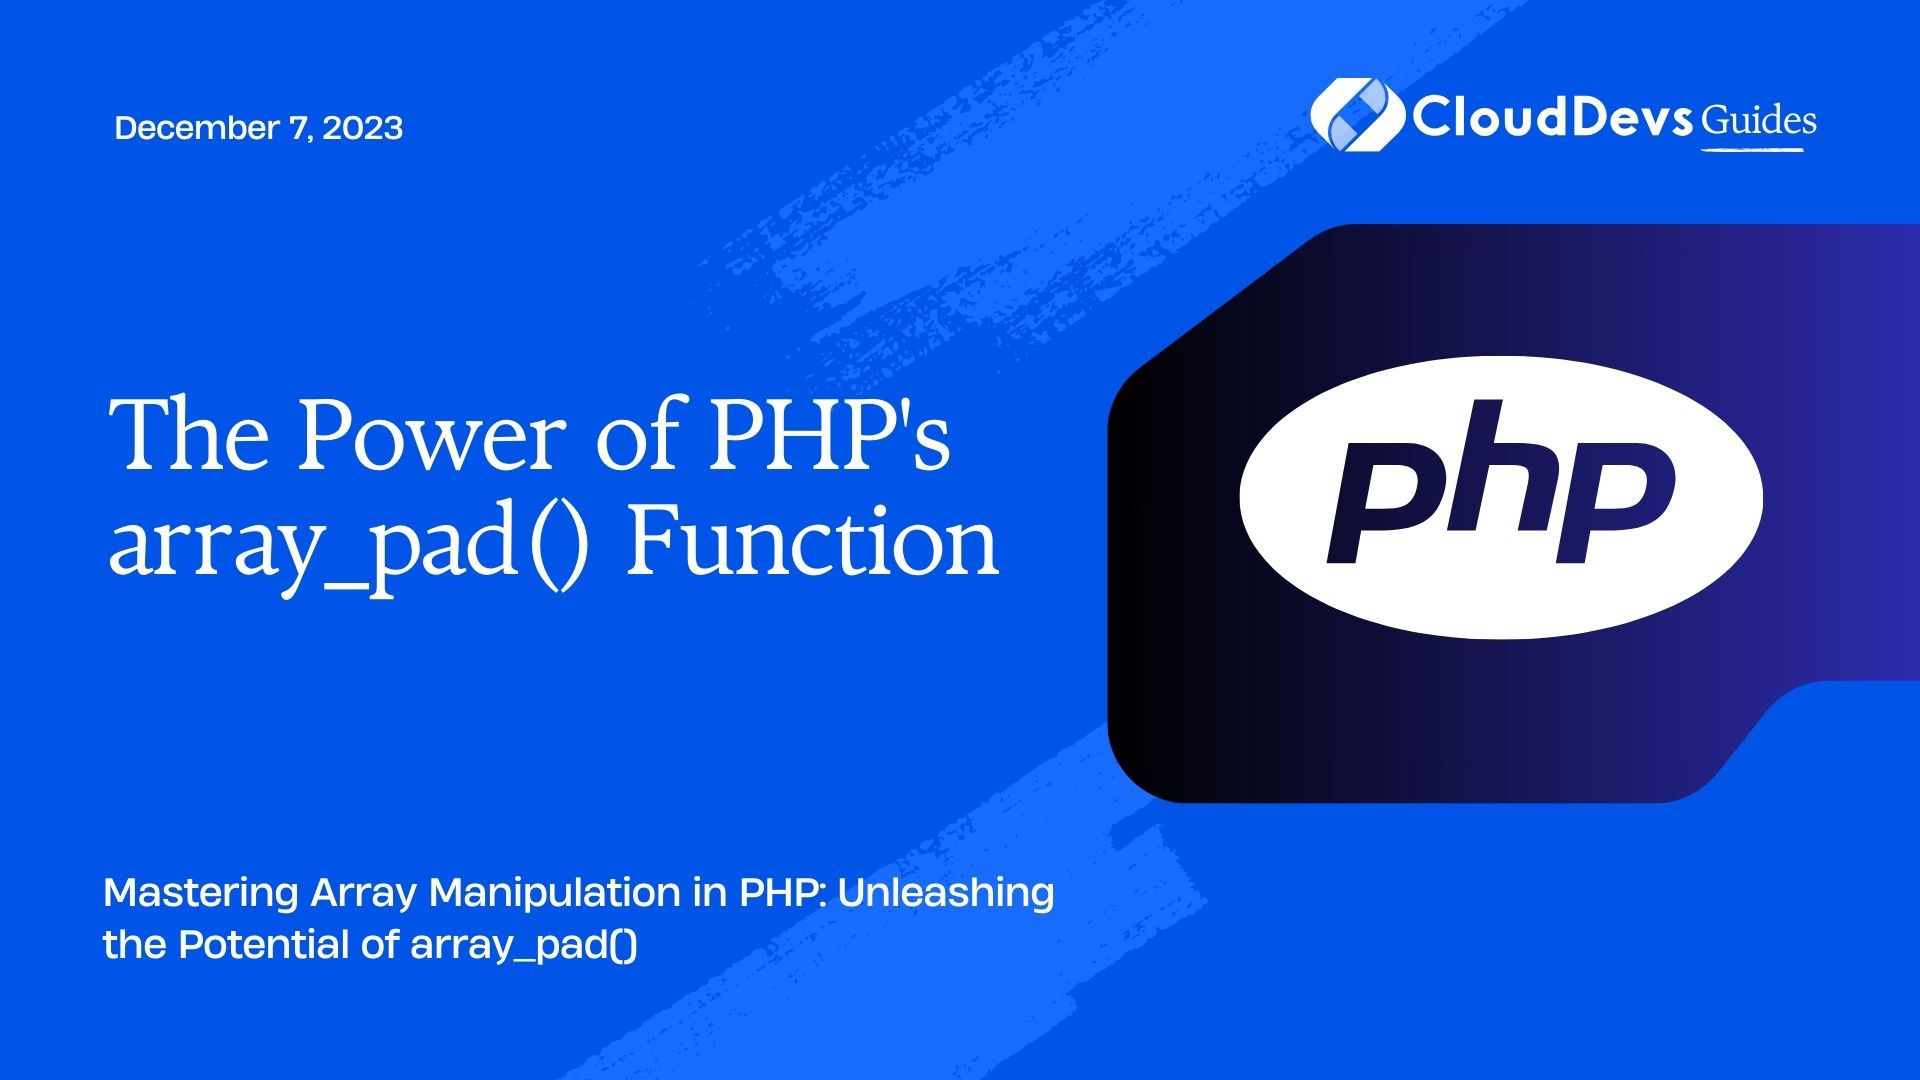 The Power of PHP's array_pad() Function